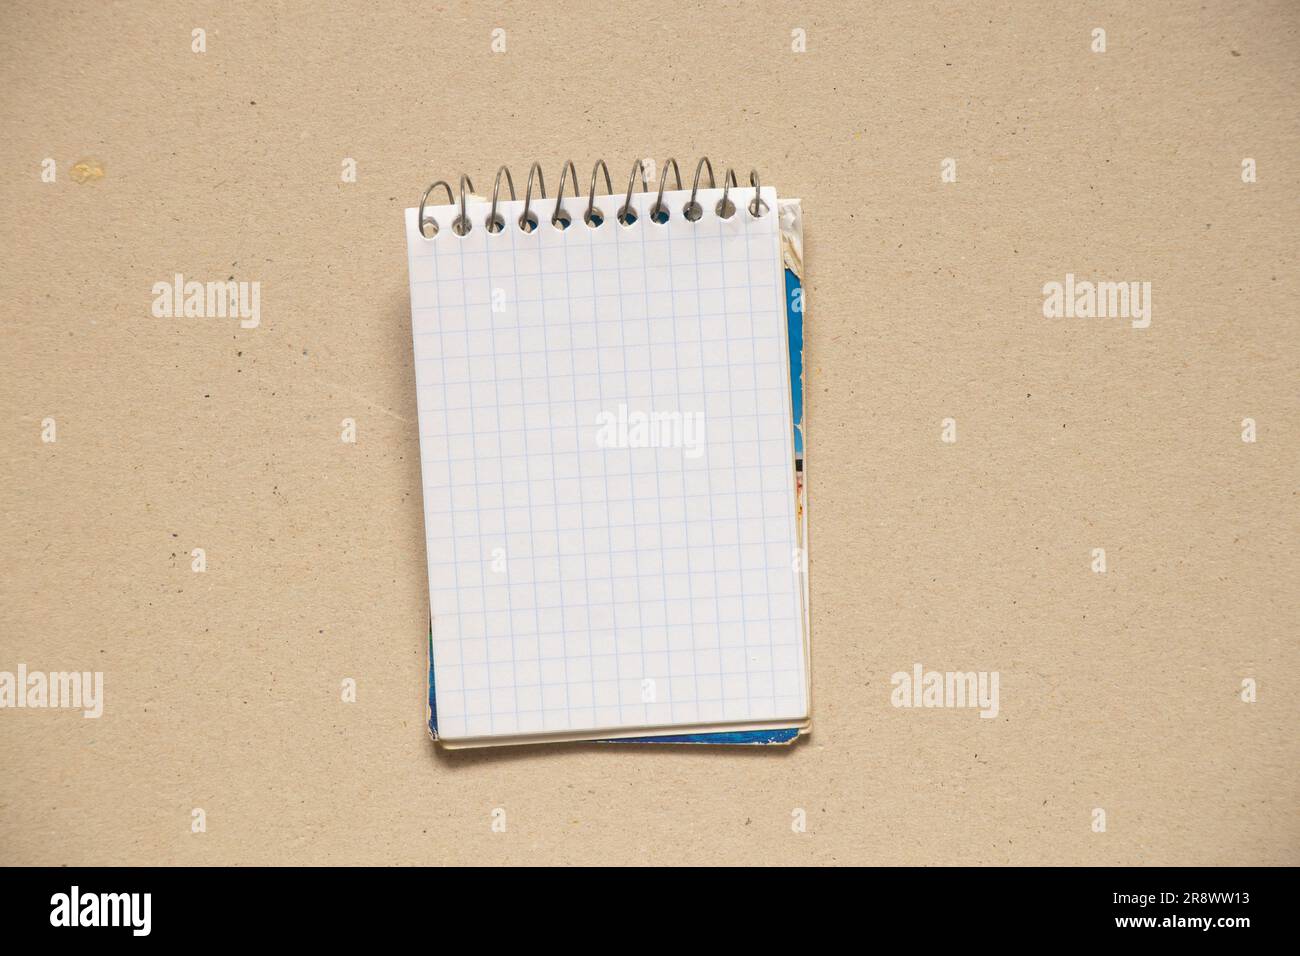 old blank squared notebook on paper close up Stock Photo